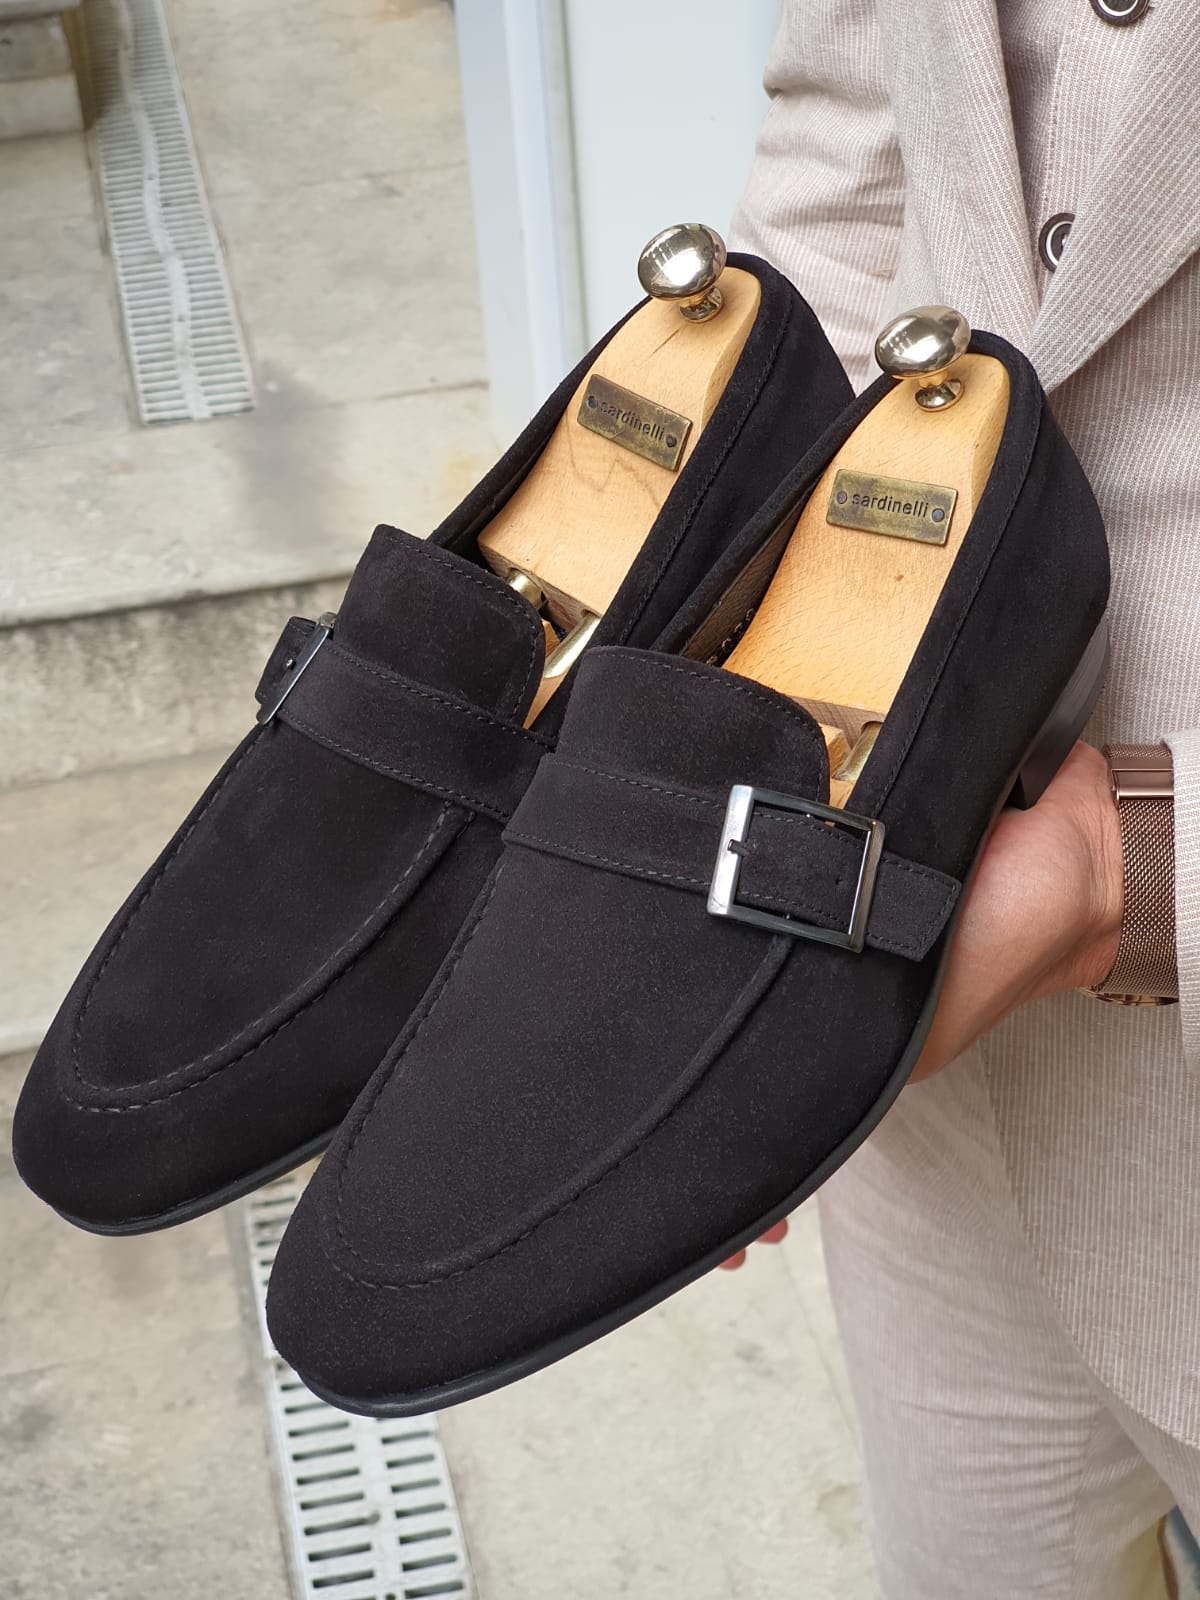 Buy Black Suede Buckle Loafers by Sardinelli | Free Worldwide Shipping